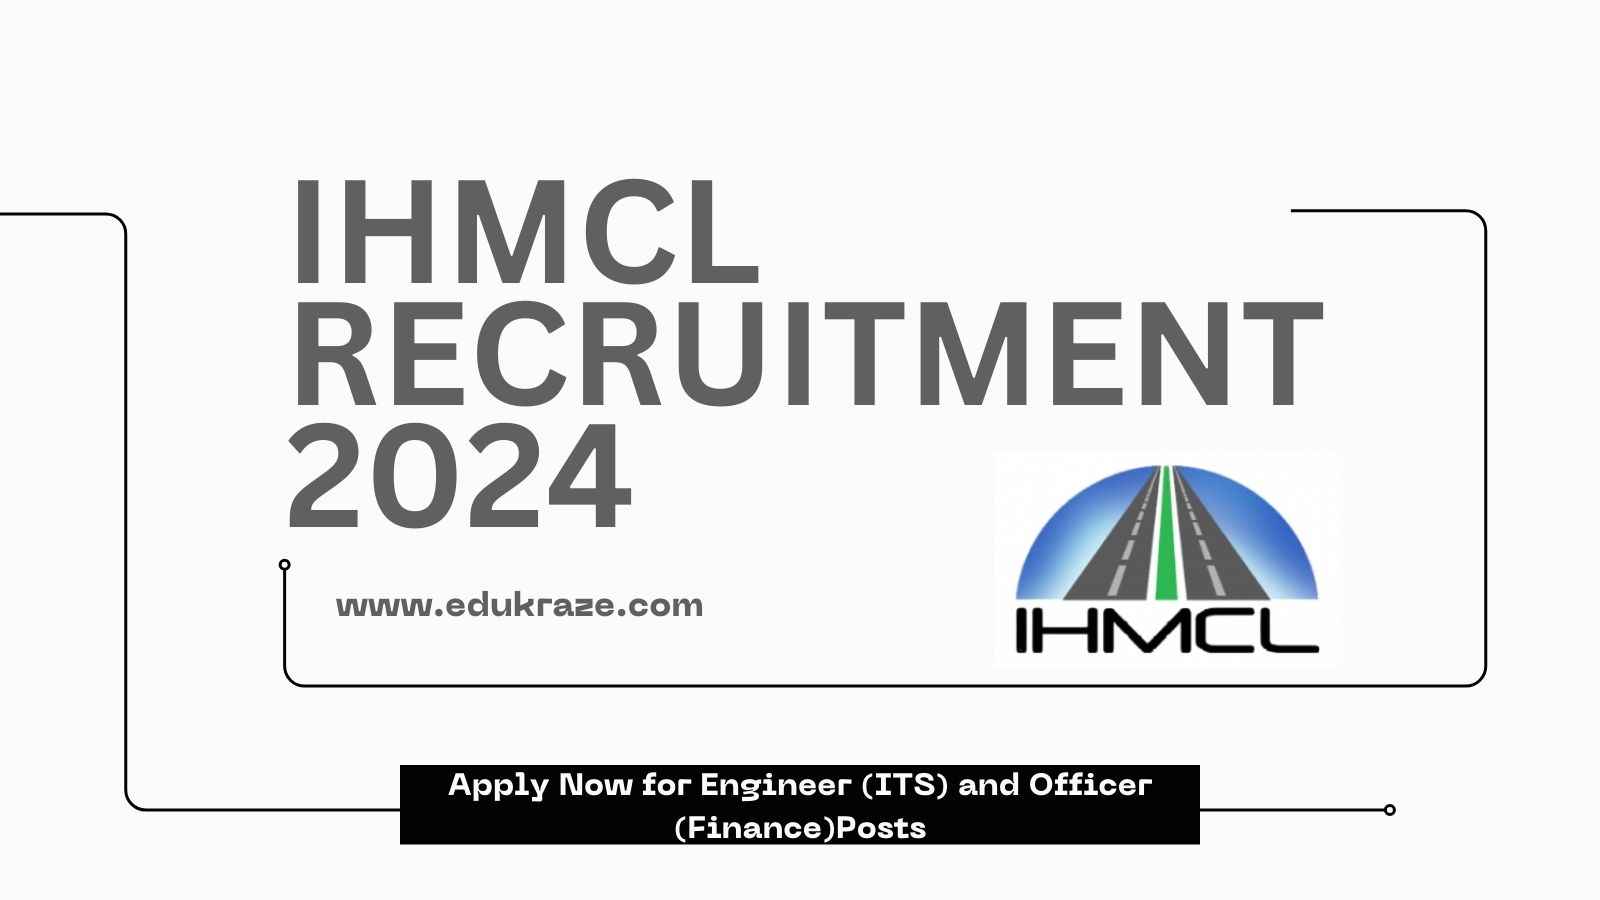 IHMCL Recruitment 2024: Apply Now for Engineer (ITS) and Officer (Finance) Positions